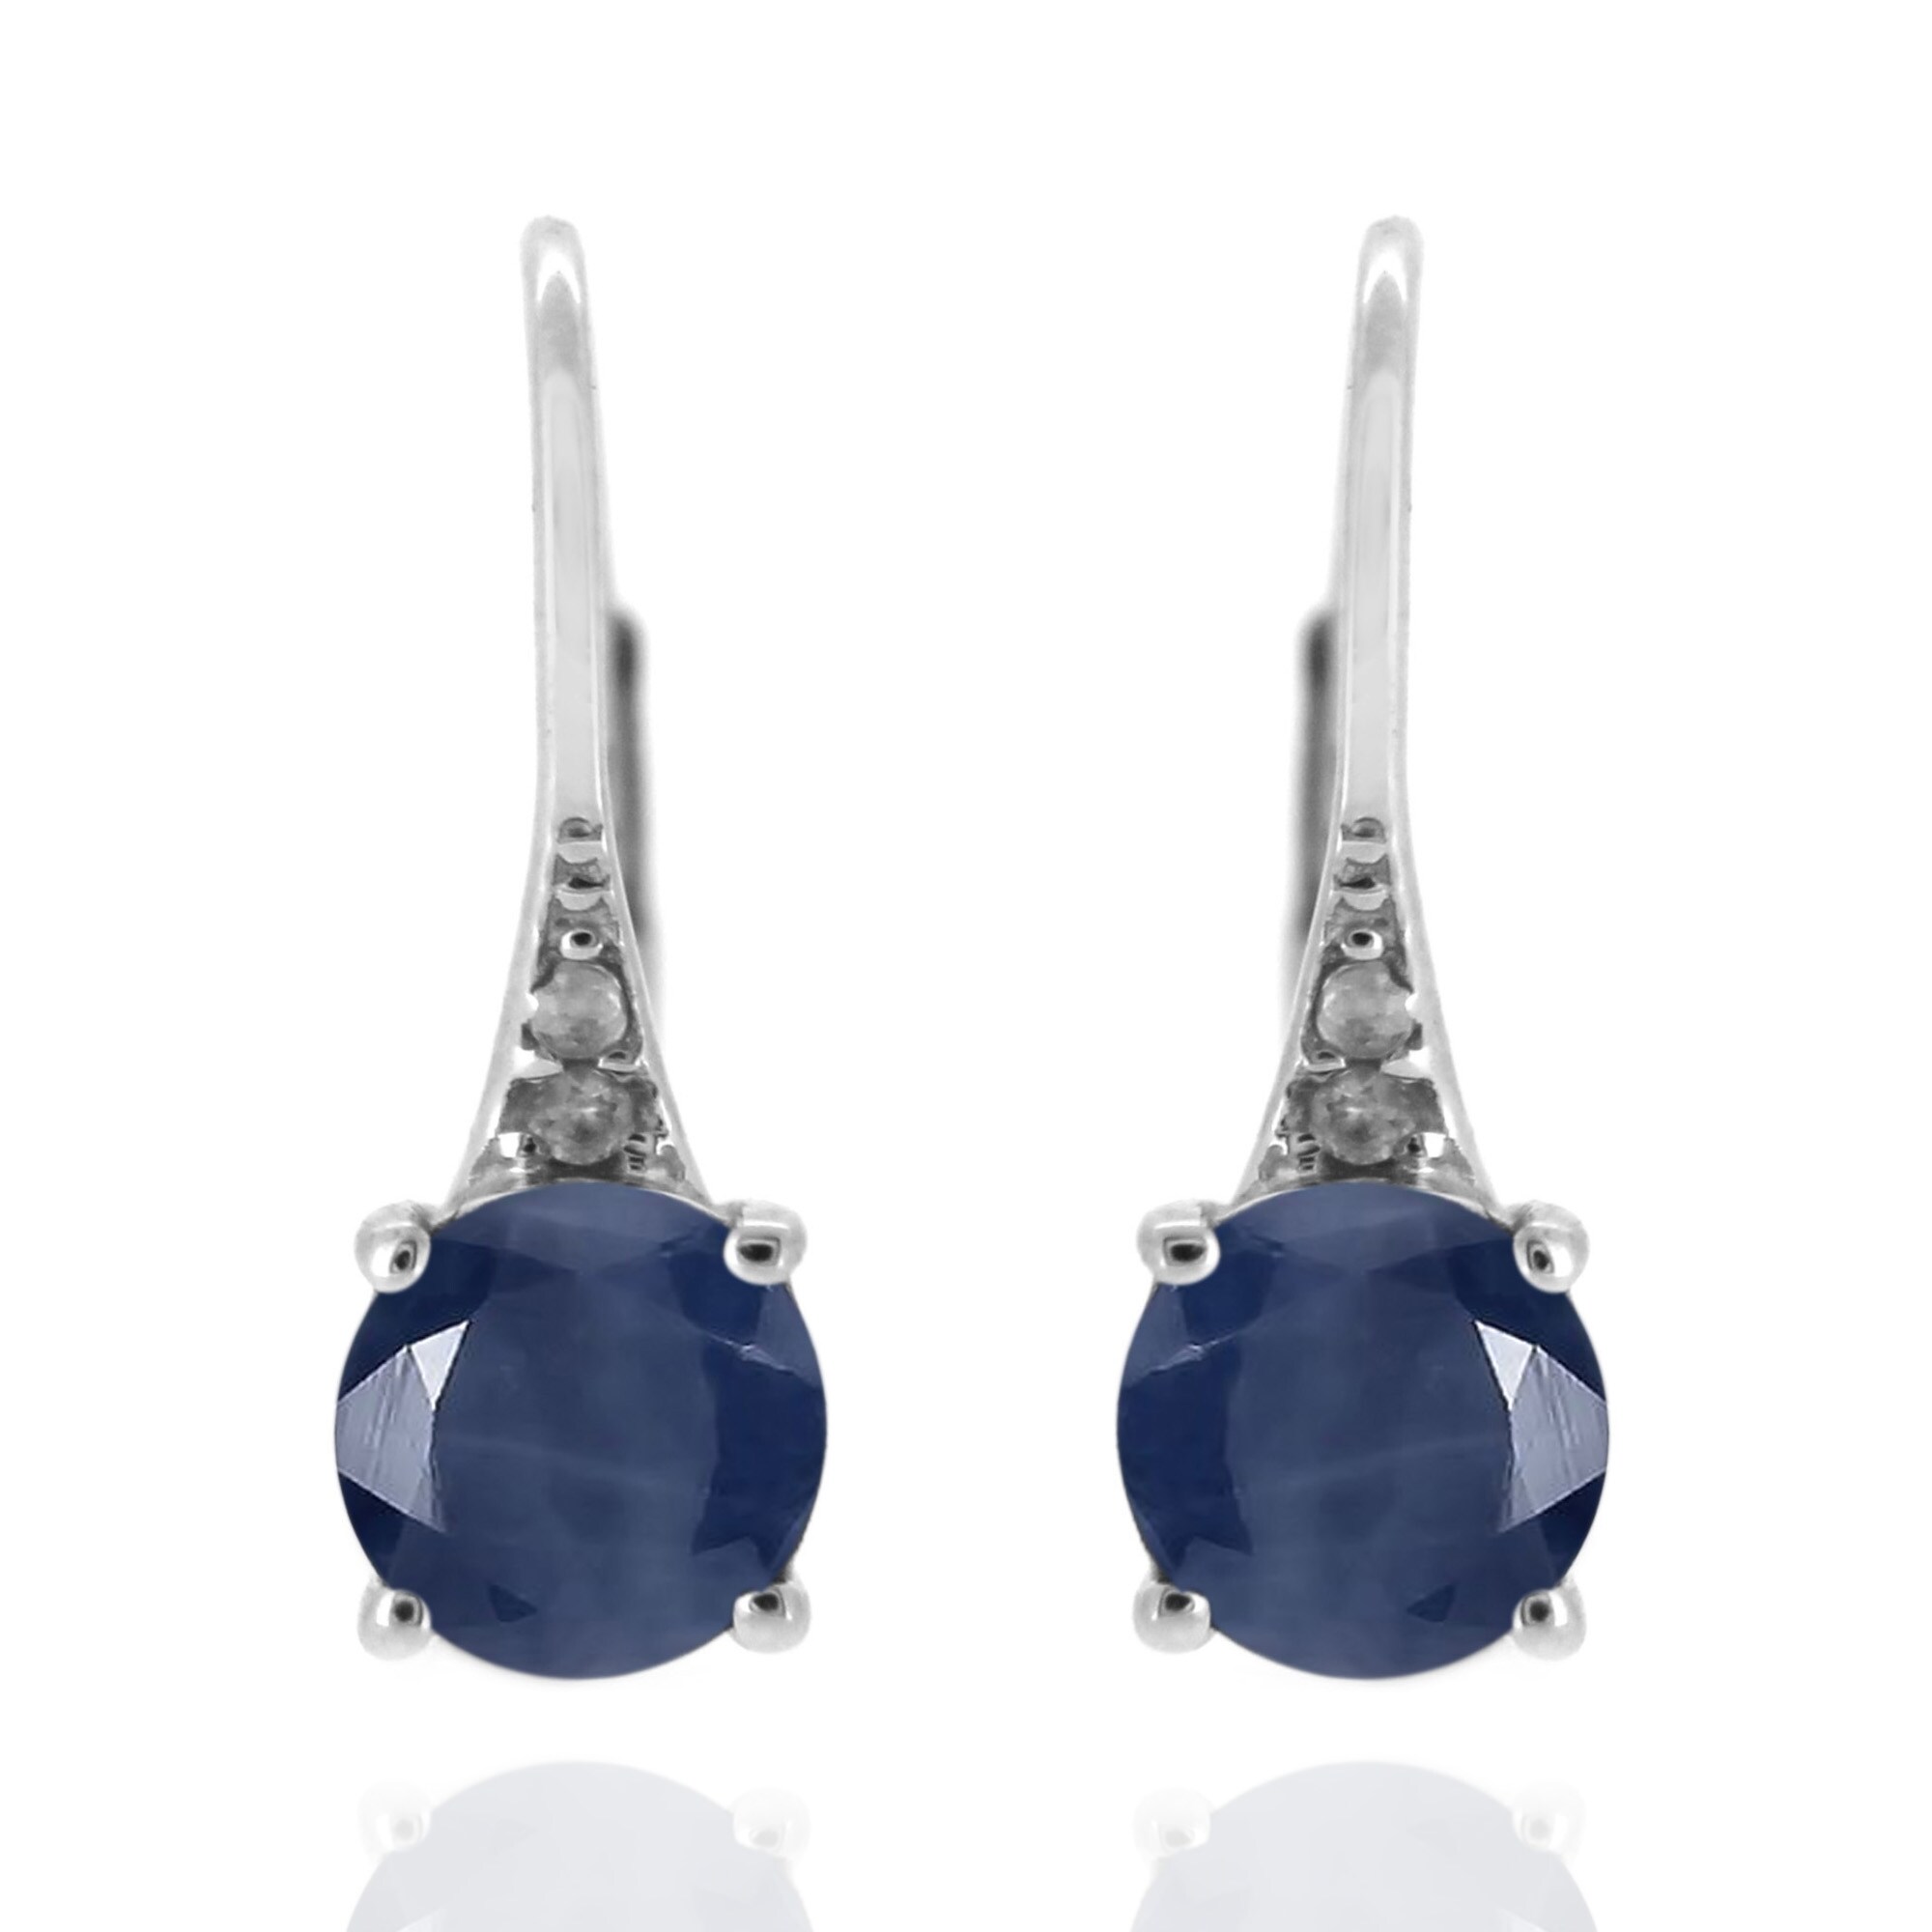 Details about   Genuine Blue Sapphire Gemstone Victorian Diamond 925 Sterling Silver Earring